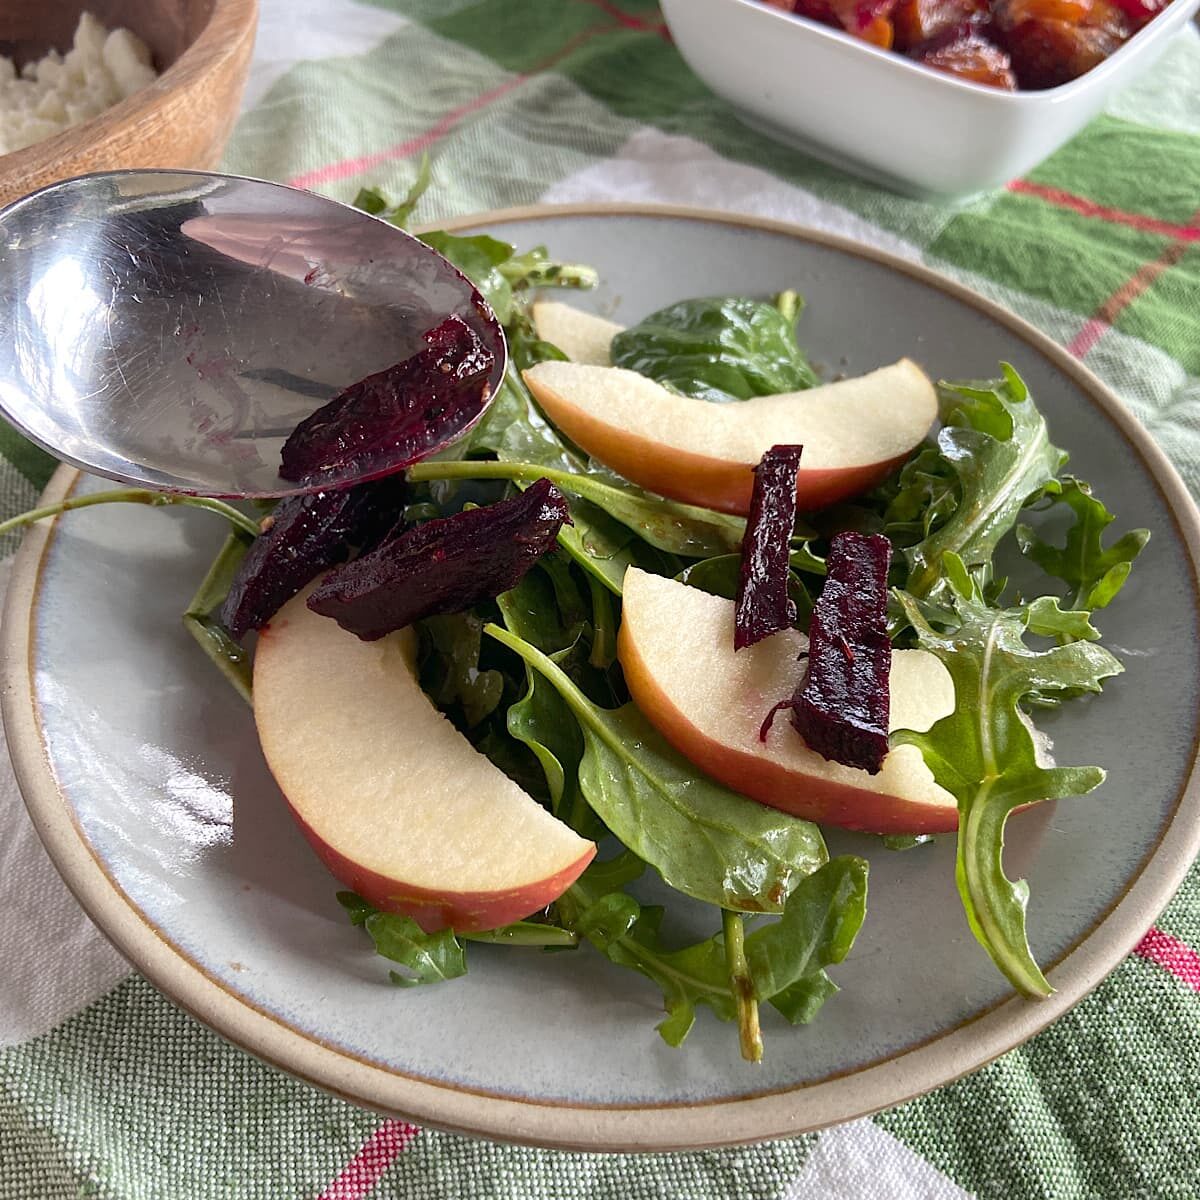 Layering beets over sliced apples, and greens on a plate.